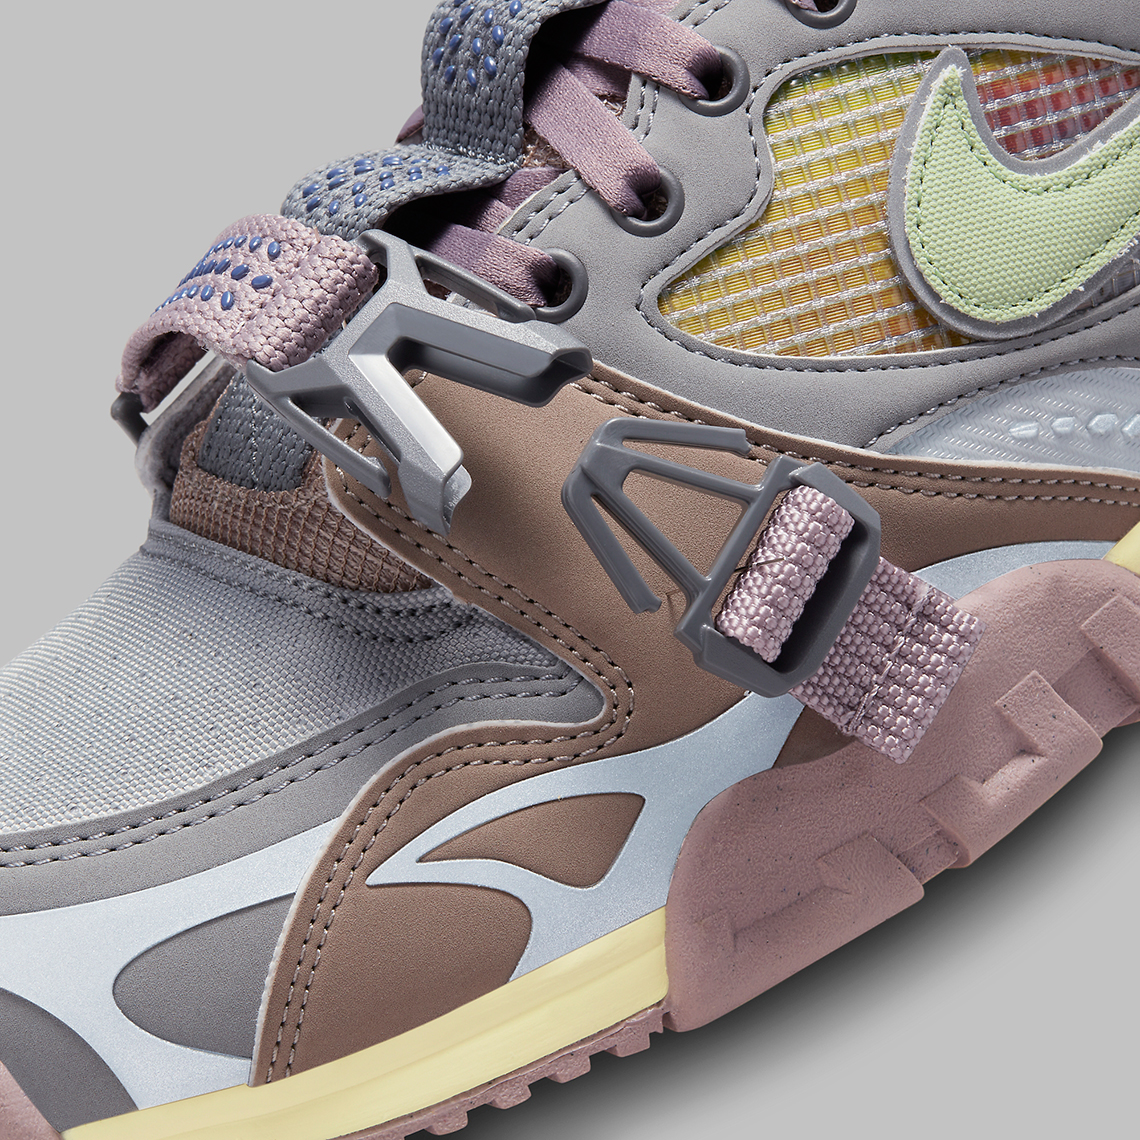 Nike Air Trainer 1 Sp Light Smoke Grey Honey Dew Particle Grey Dh7338 002 10